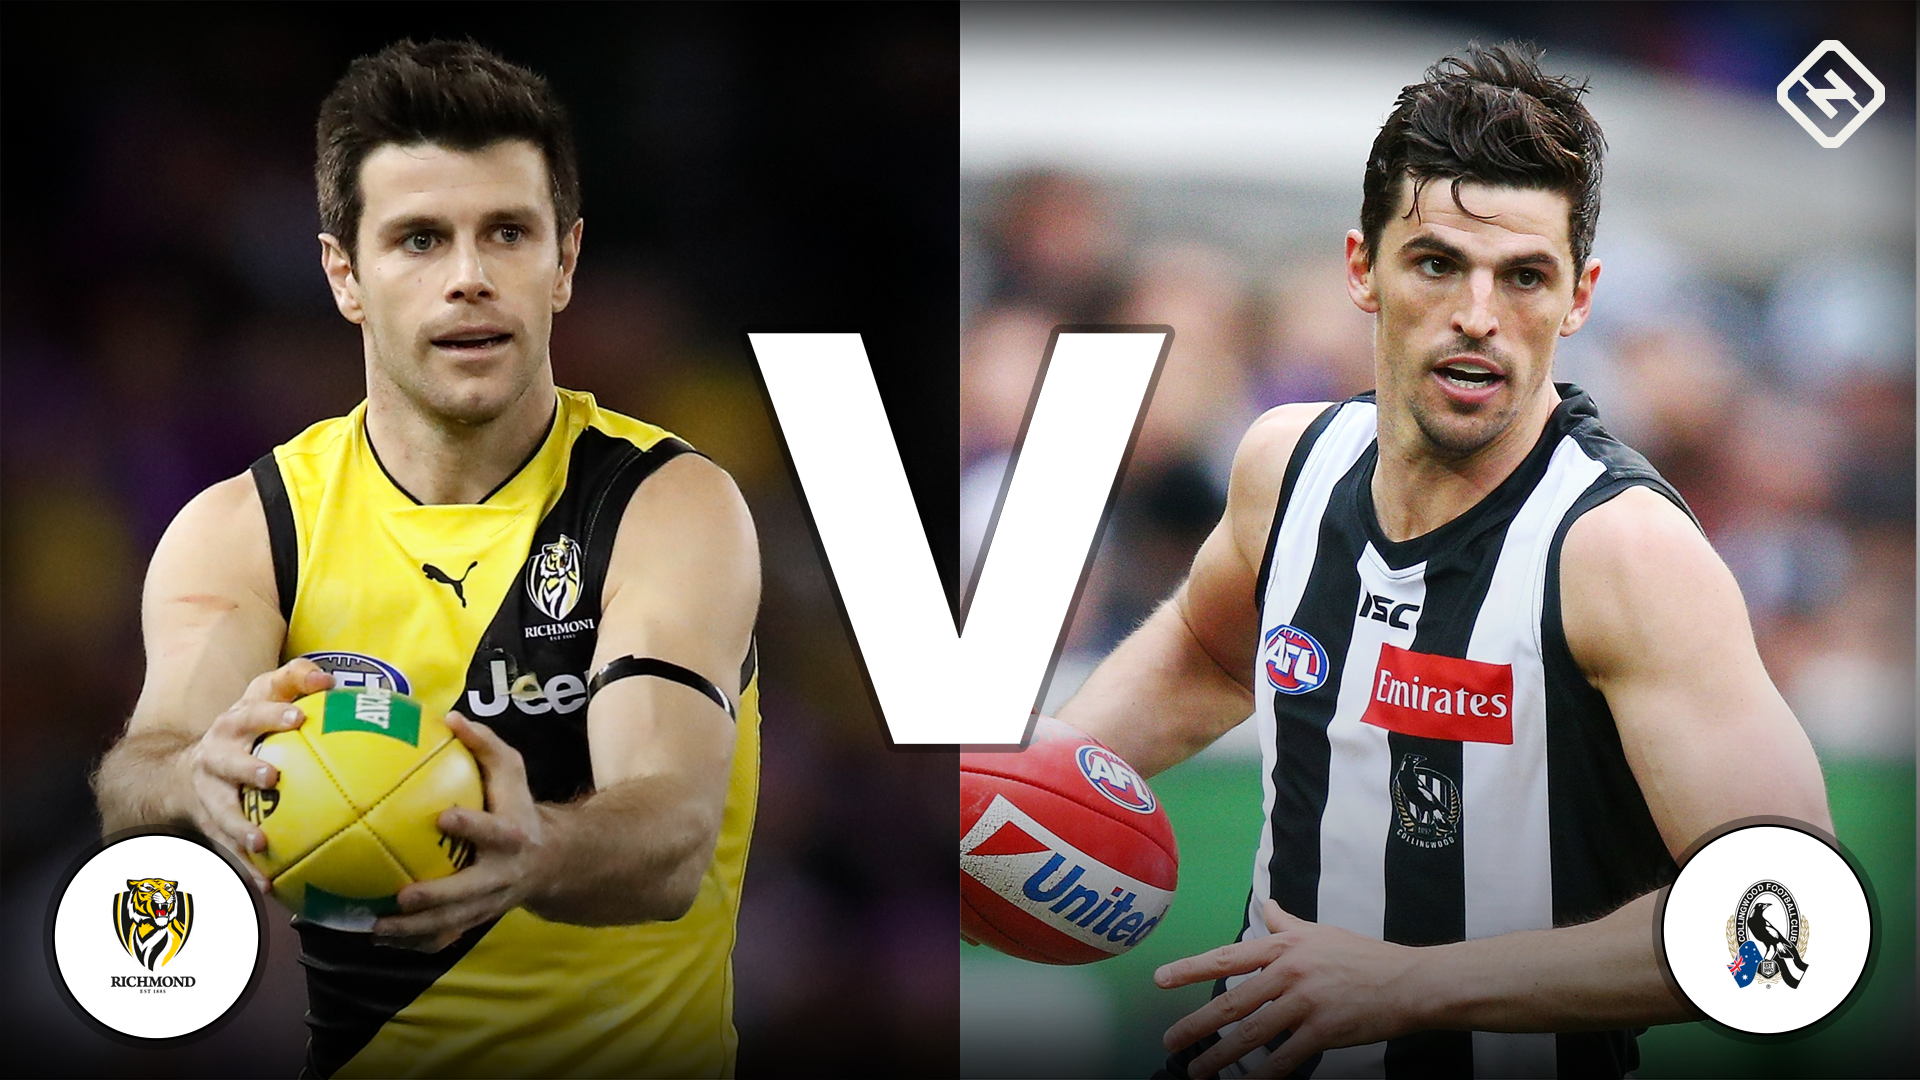 Richmond Tigers V Collingwood Magpies - Richmond Vs Collingwood 2018 , HD Wallpaper & Backgrounds